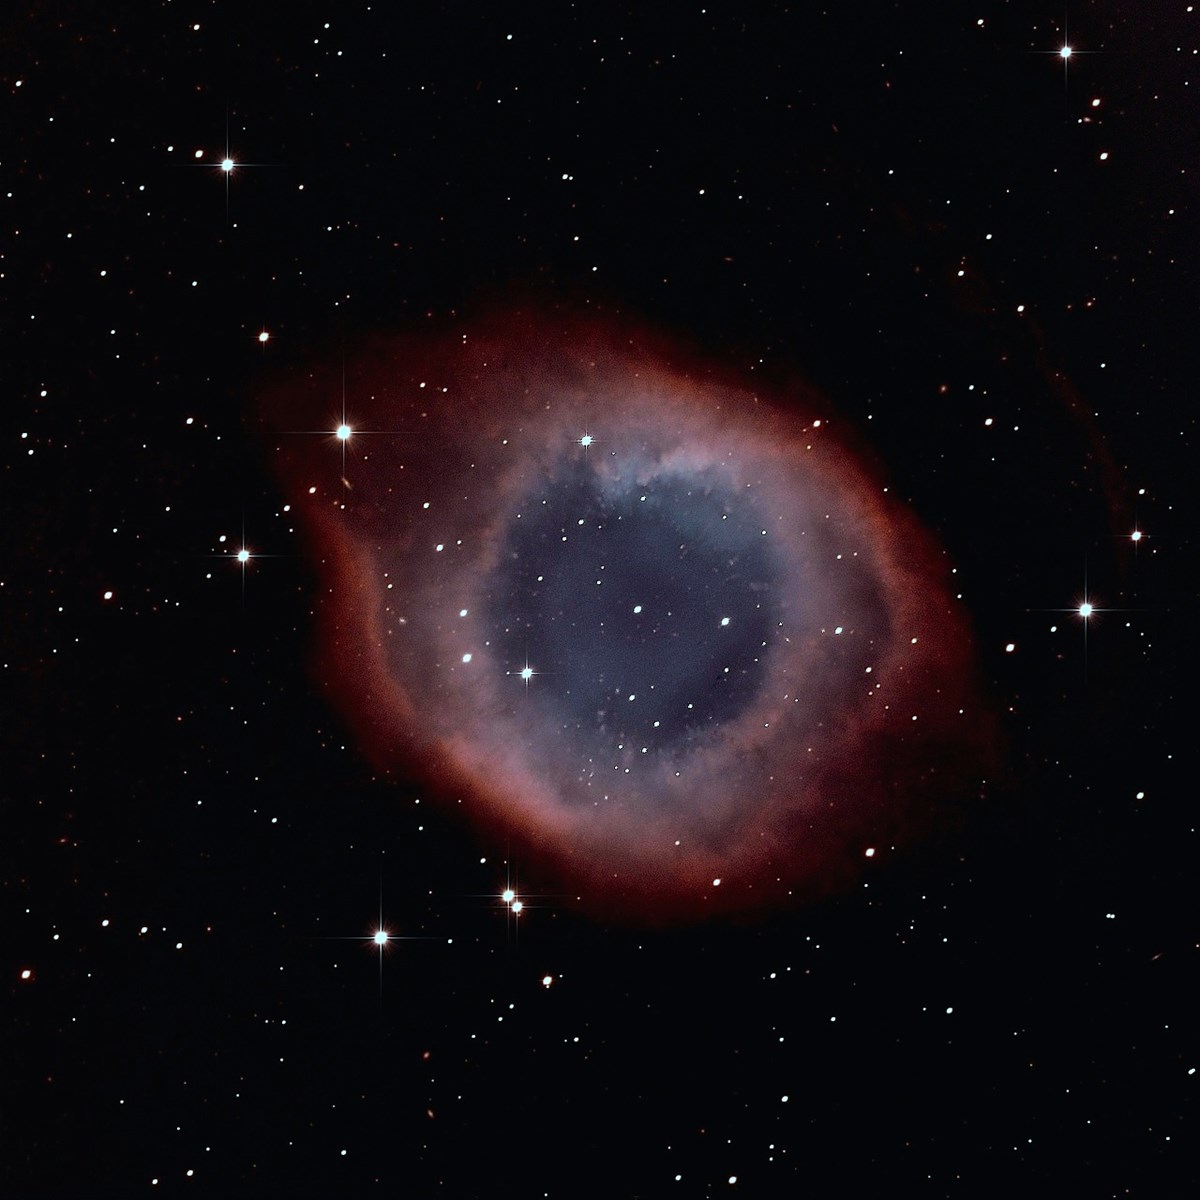 The Helix Nebula in the constellation Aquarius is an example of a planetary nebula, gas emitted from a star at the end of its burning cycle. It is 700 light years (400 trillion miles) from Earth and is a mere 2.5 light years wide.